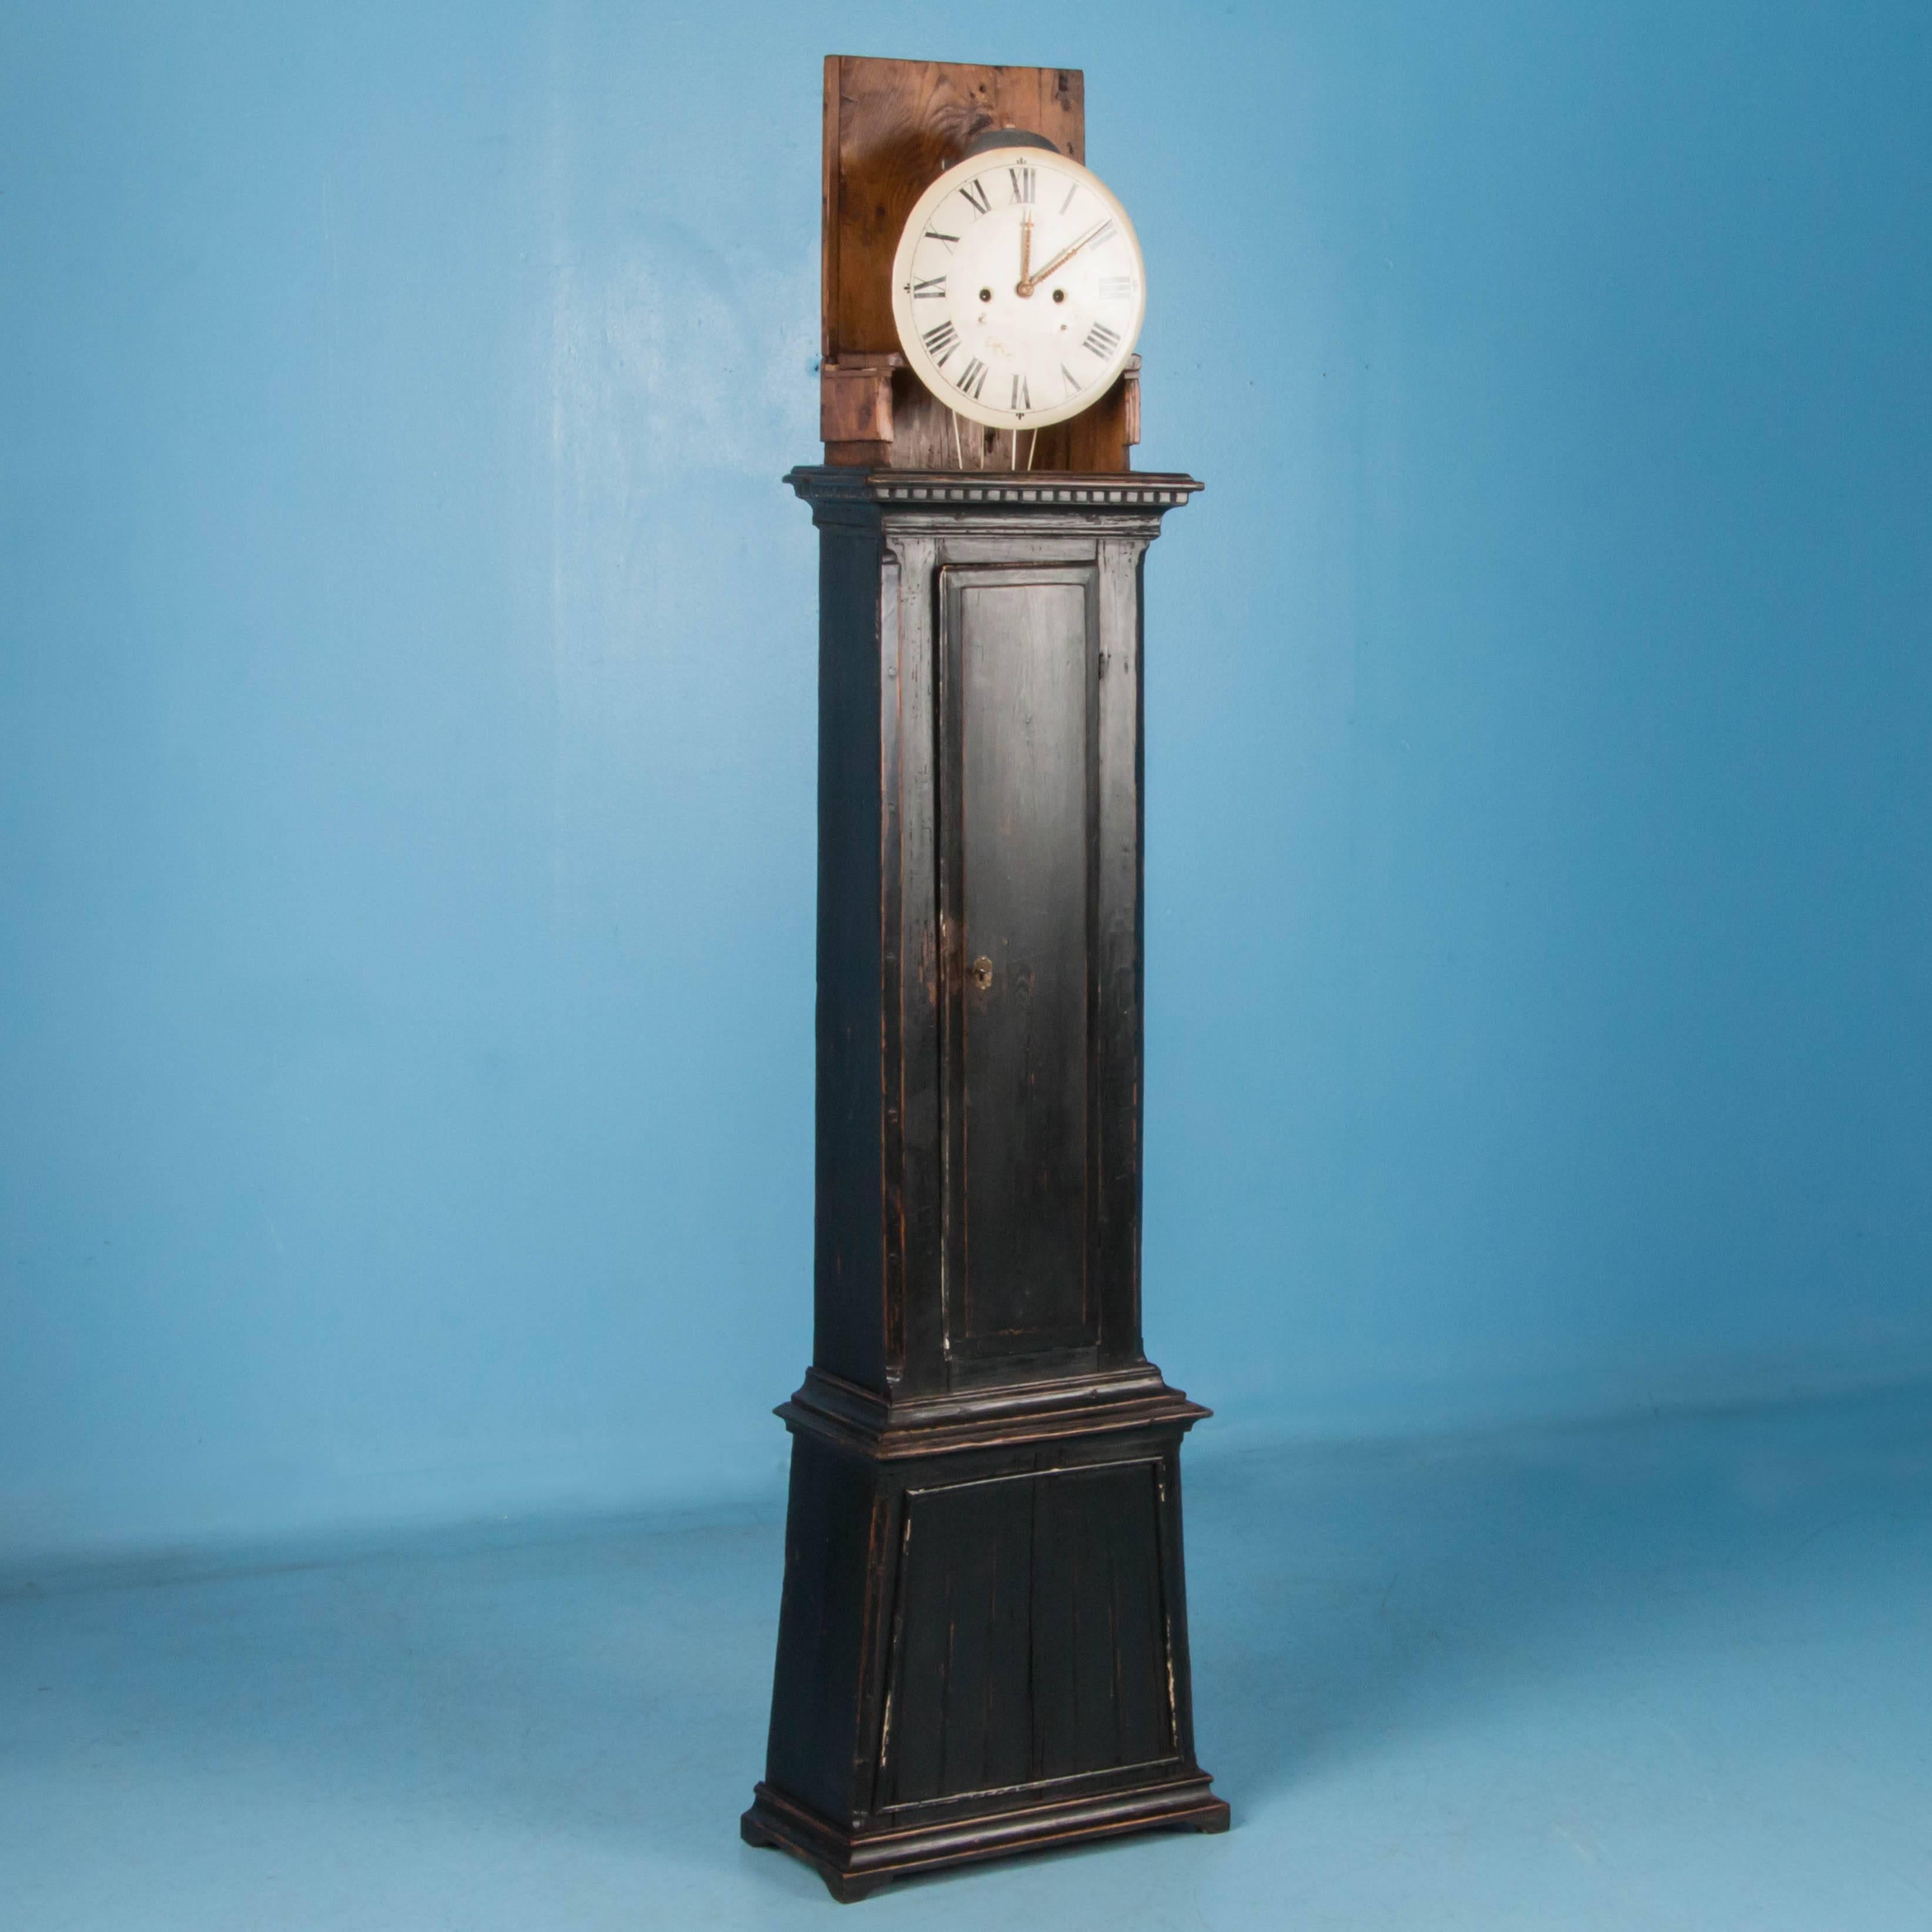 Antique grandfather clock from Denmark, circa 1840-1860 with a newer black painted finish. The paint has been lightly distressed exposing the natural pine and enhancing the carved details. Please take a moment to enlarge the photos and examine the